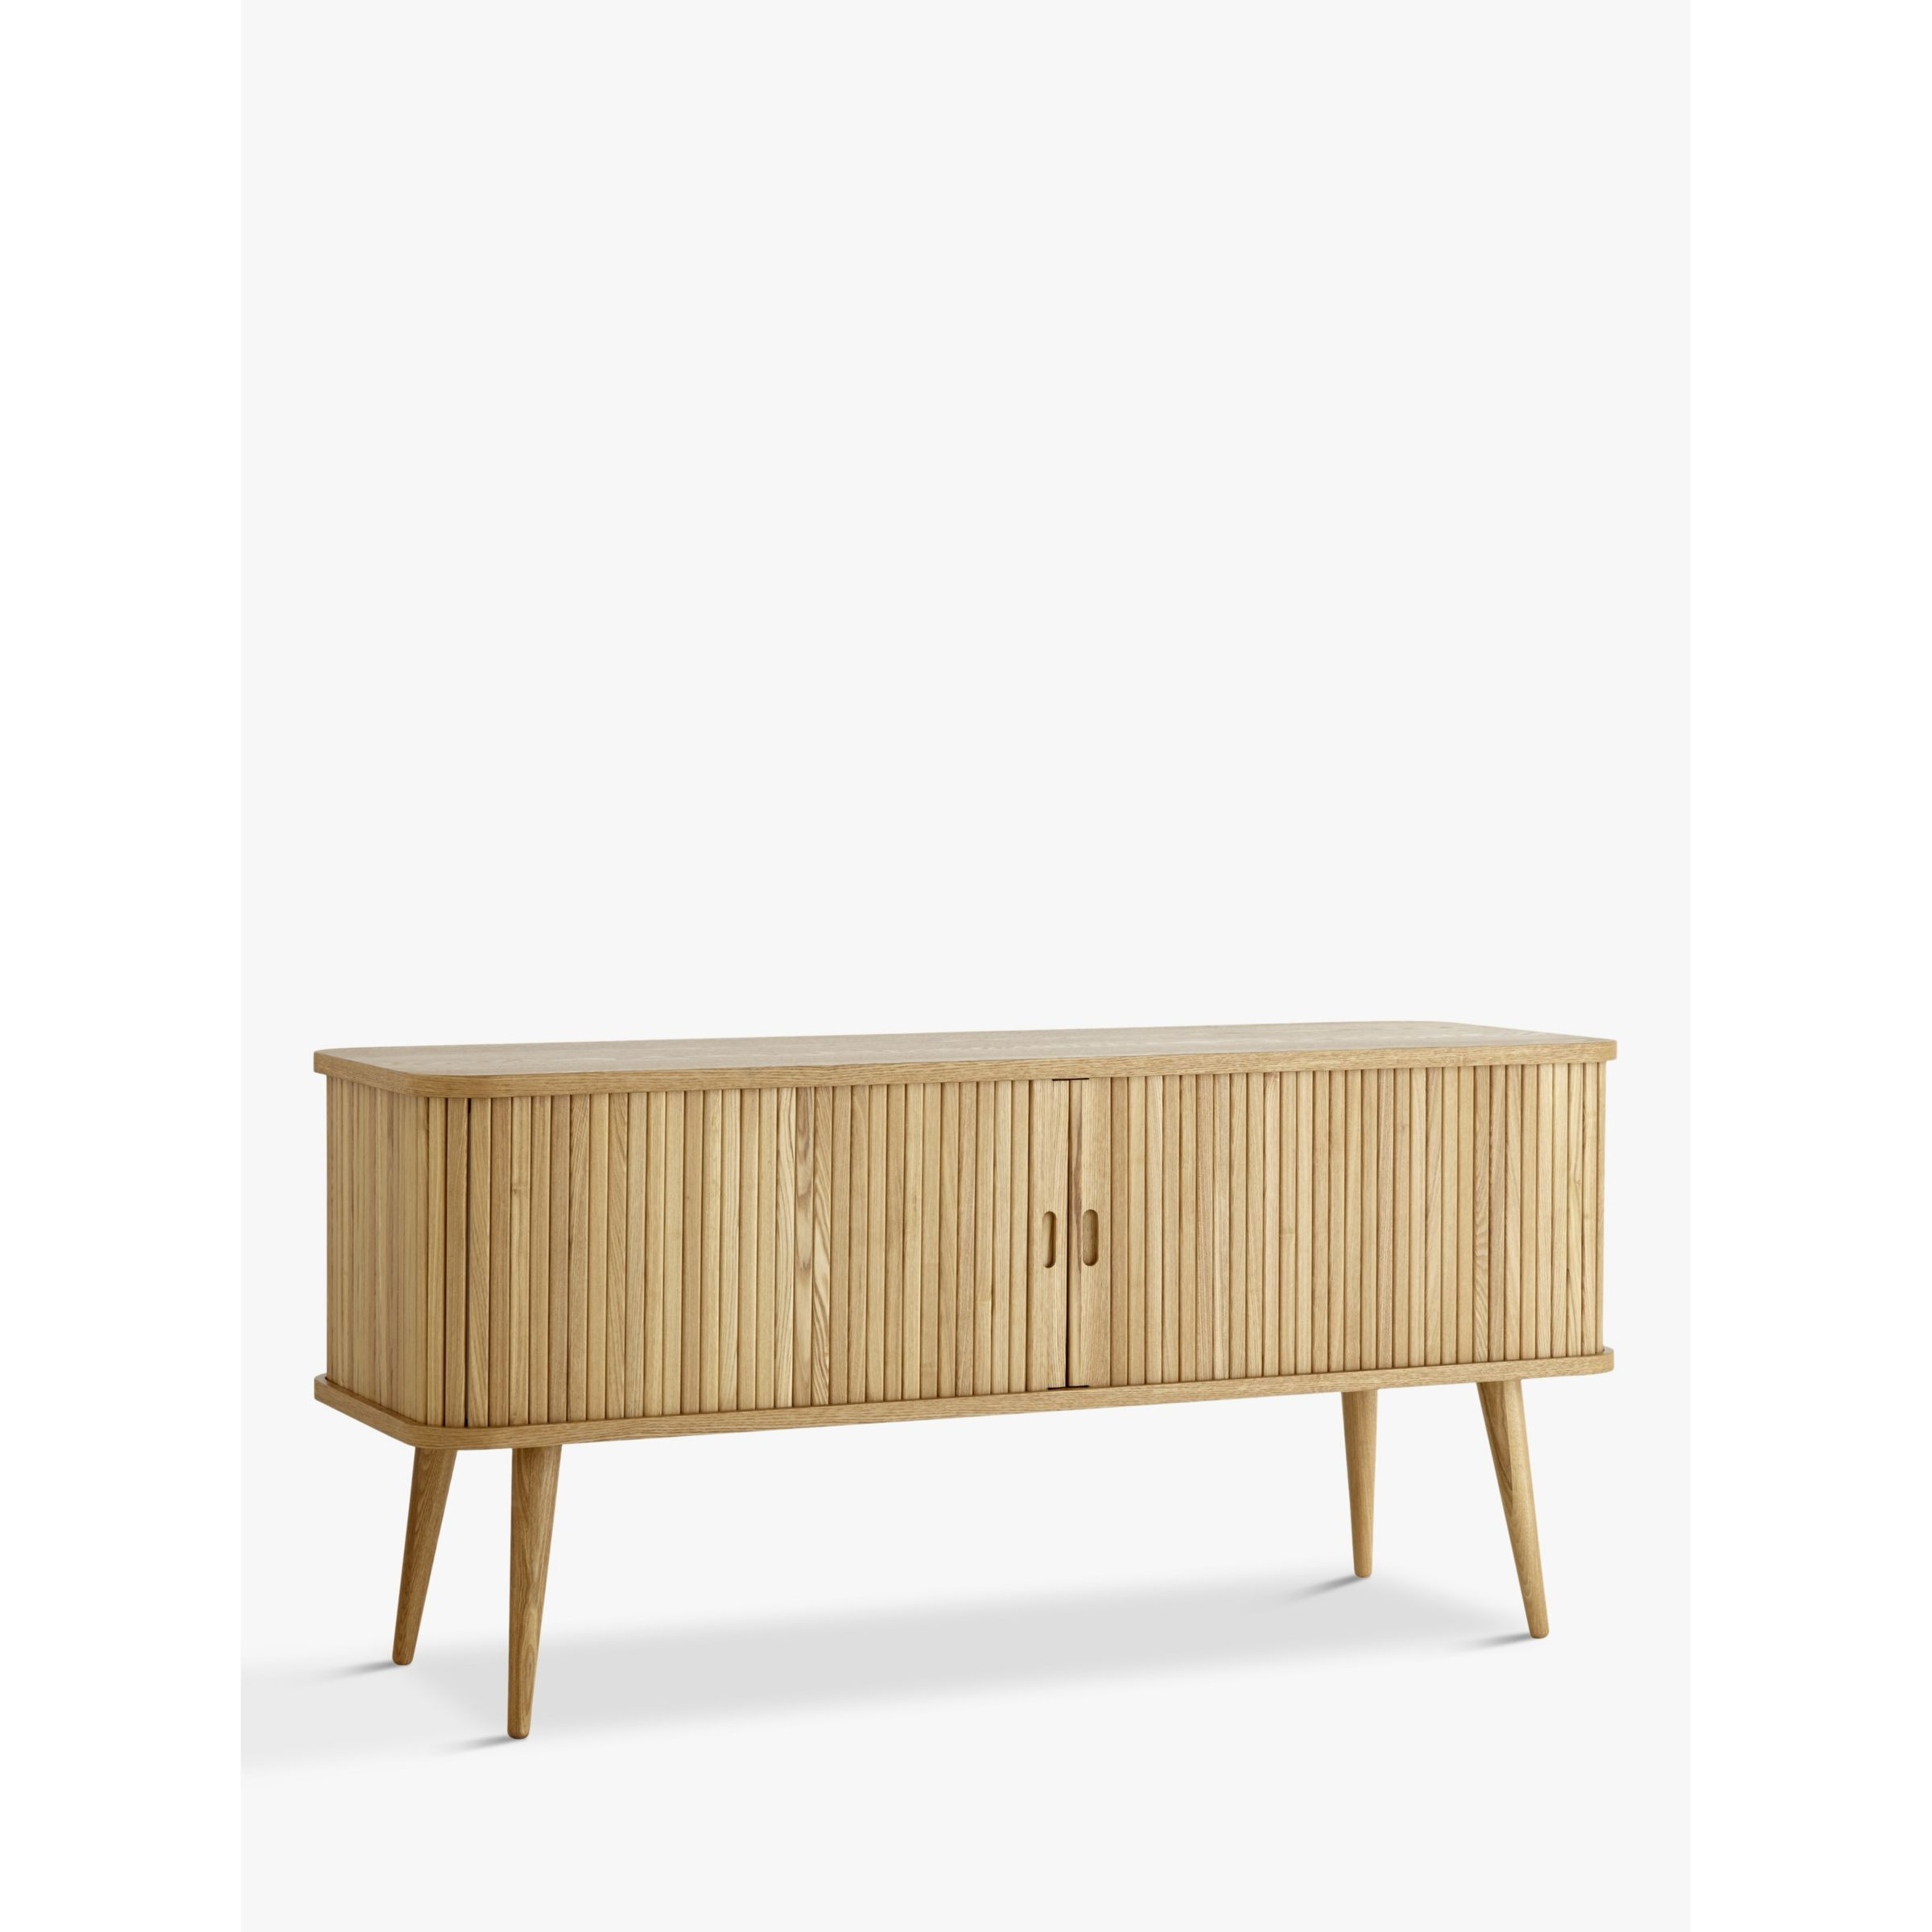 "John Lewis Grayson TV Stand Sideboard for TVs up to 60""" - image 1